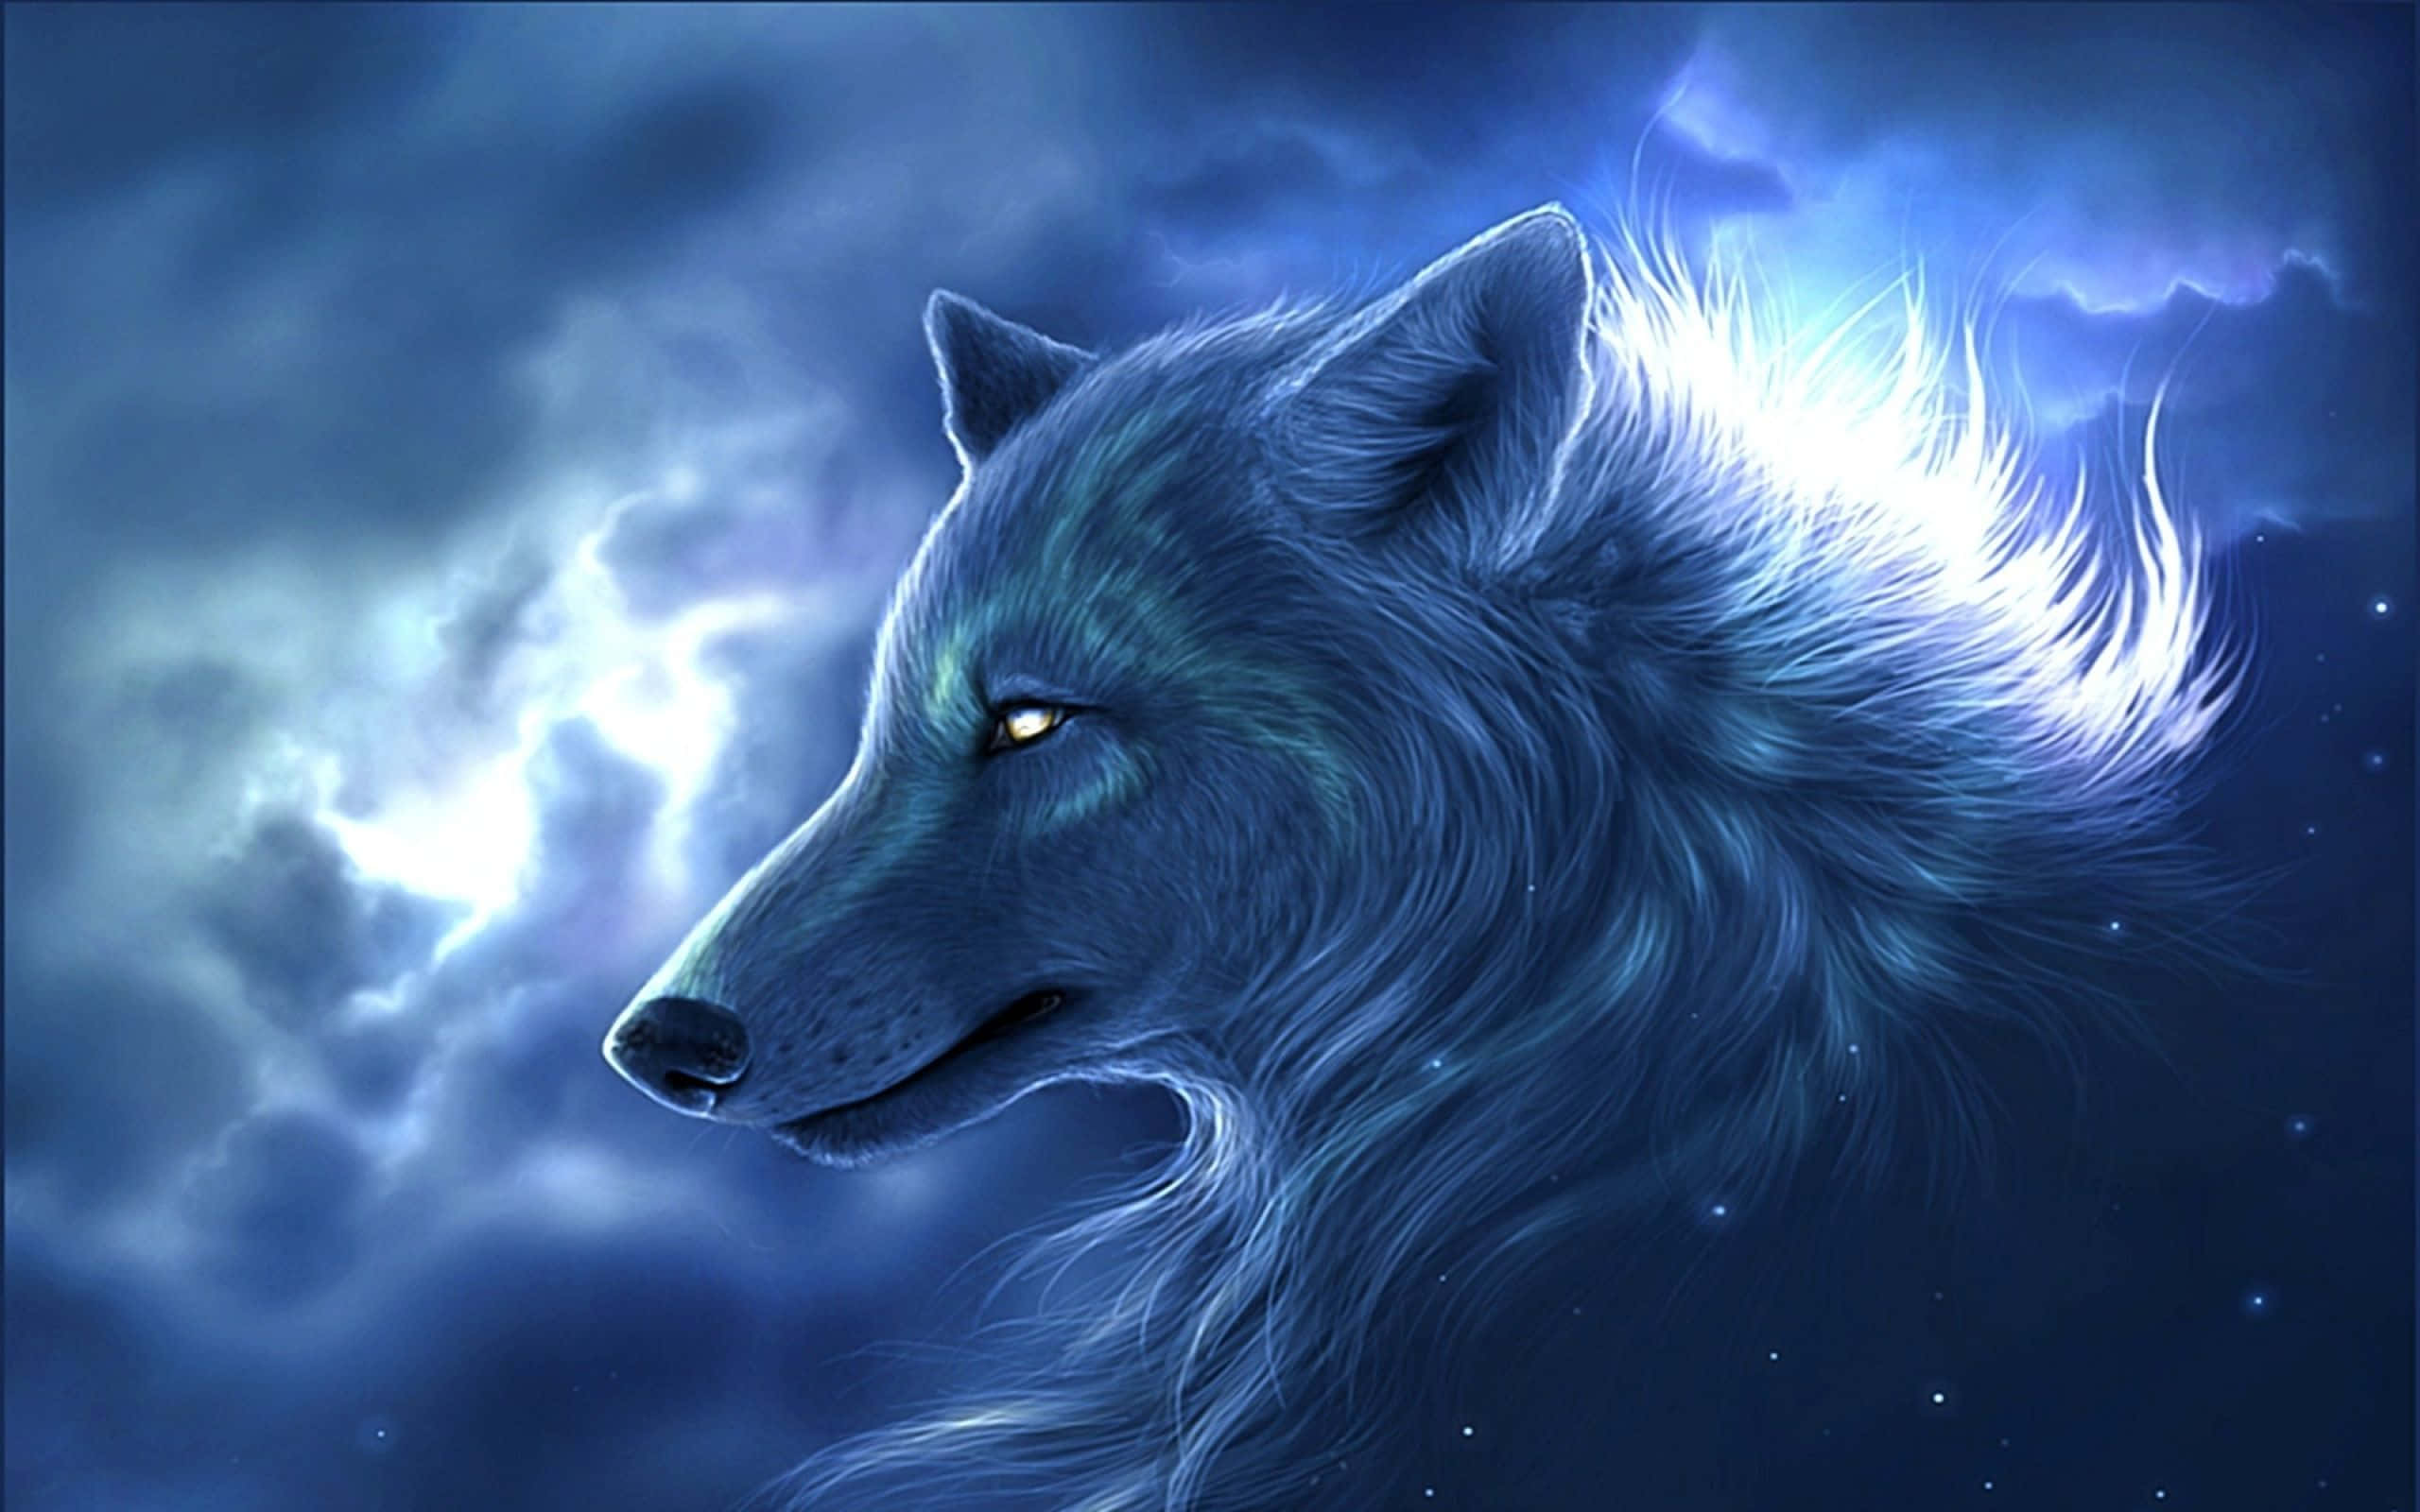 A fierce wolf stands between water and fire, a symbol of strength and power Wallpaper